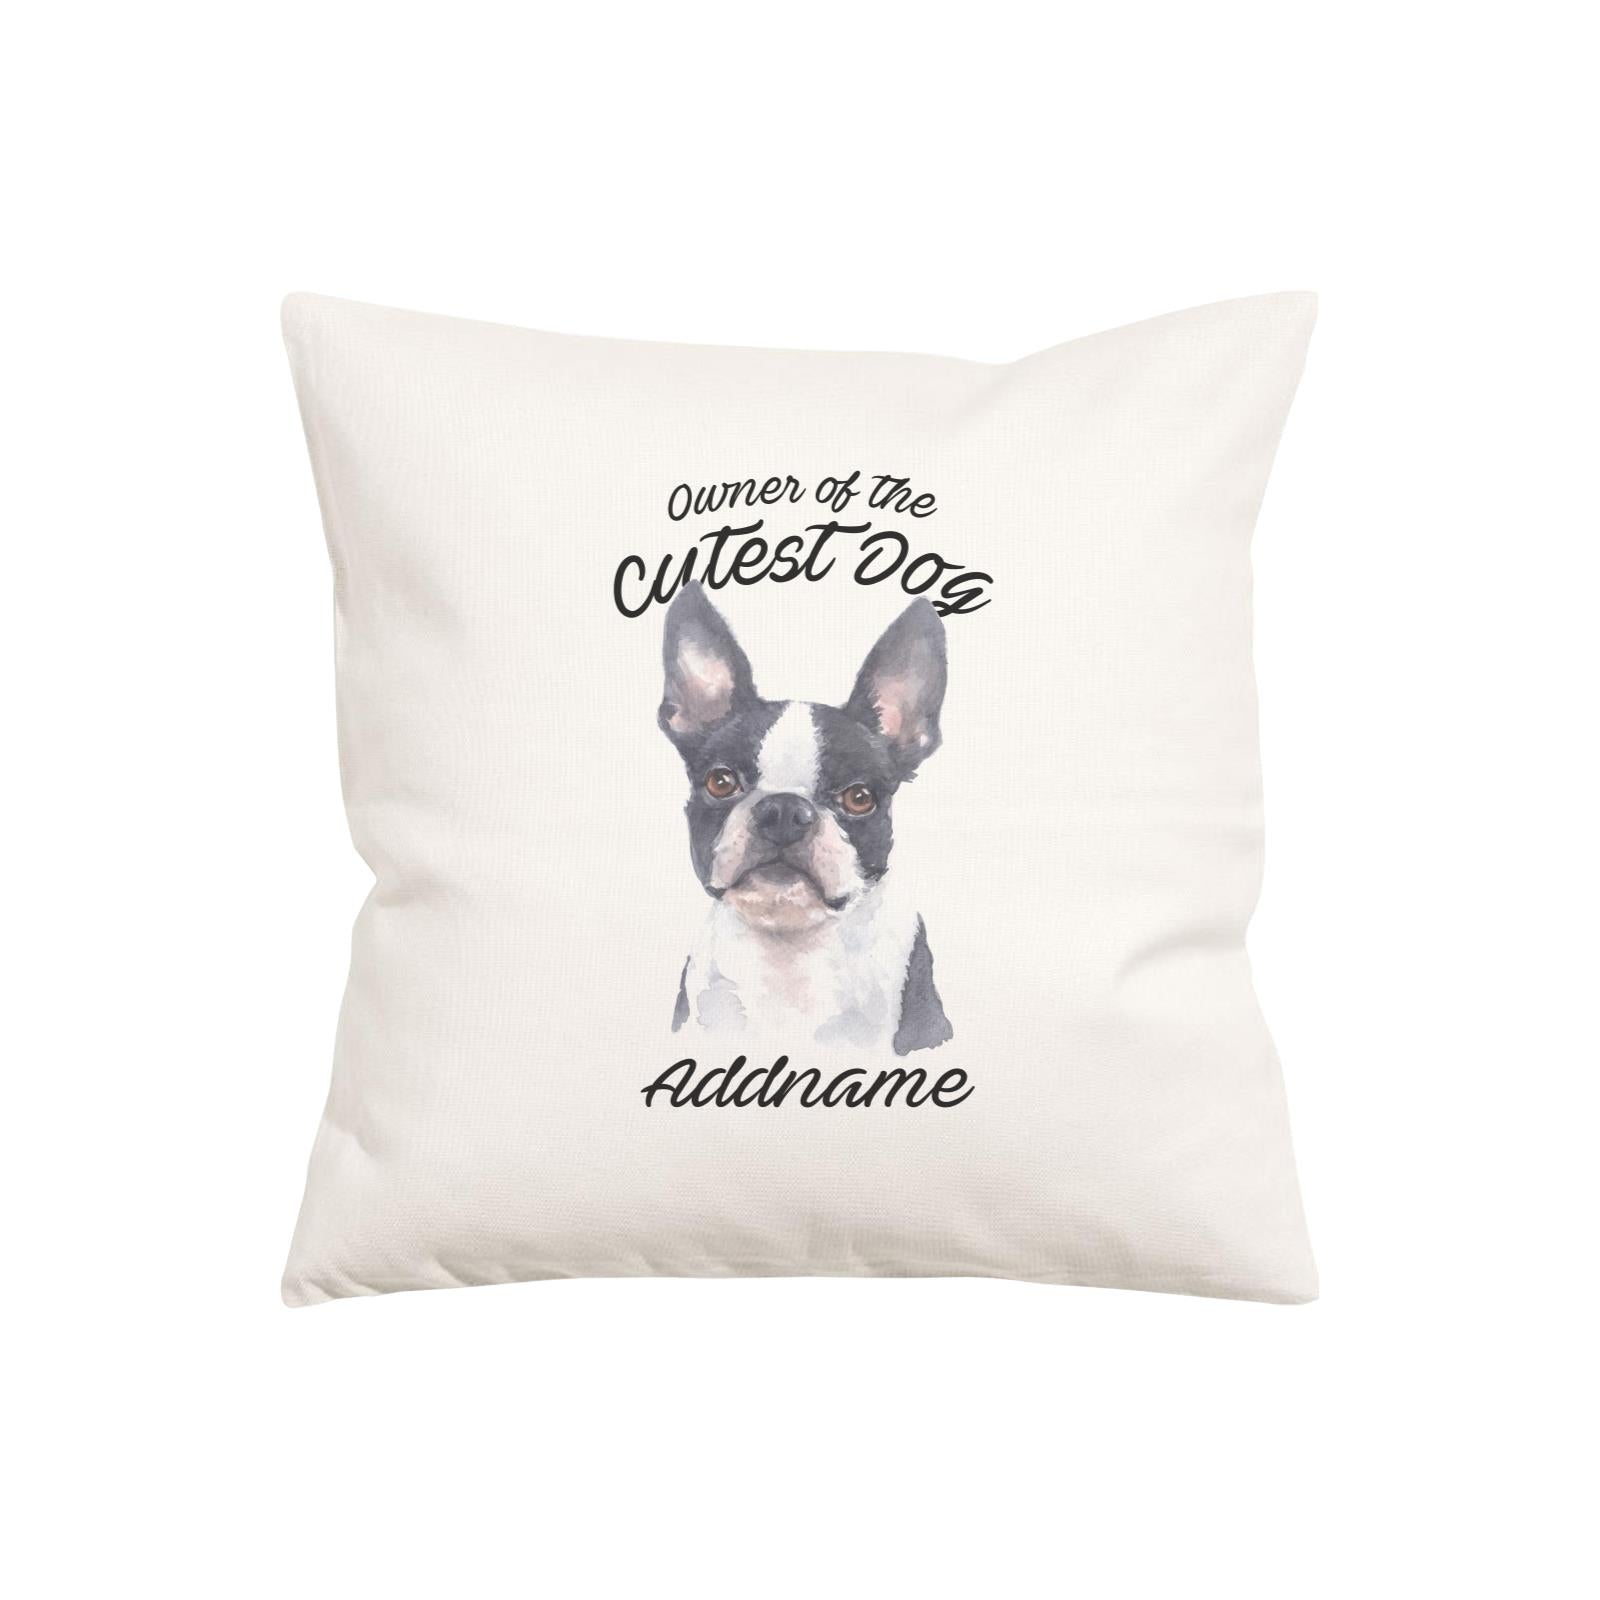 Watercolor Dog Owner Of The Cutest Dog Boston Terrier Addname Pillow Cushion